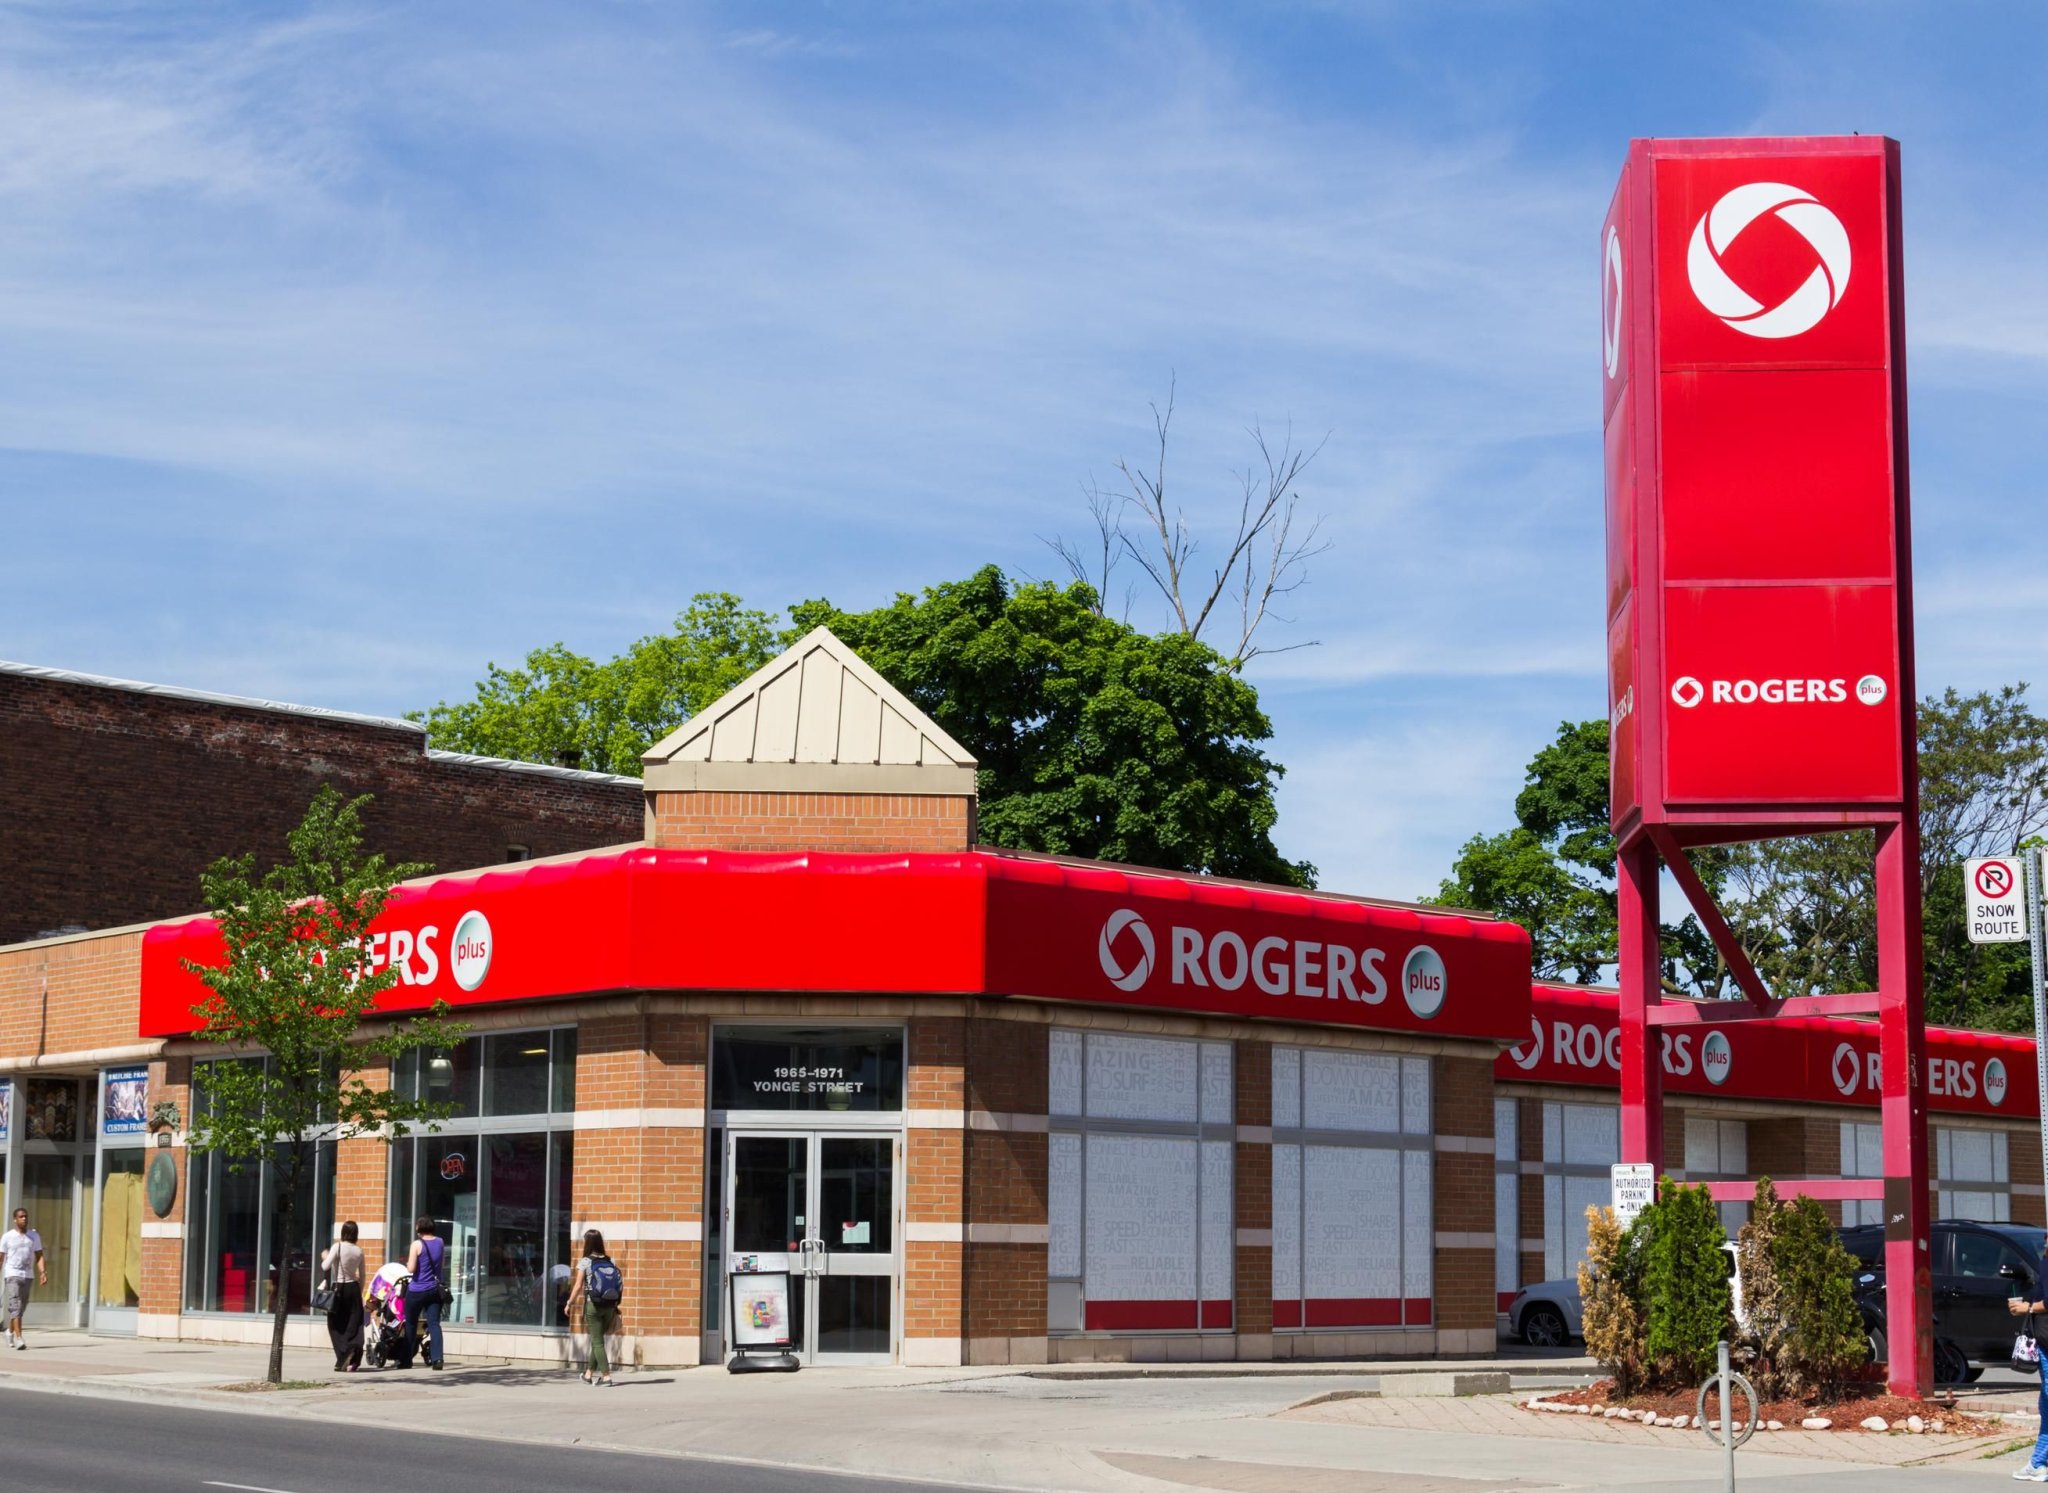 Here's What Rogers Says It's Doing To 'Win Back' Canada's Trust